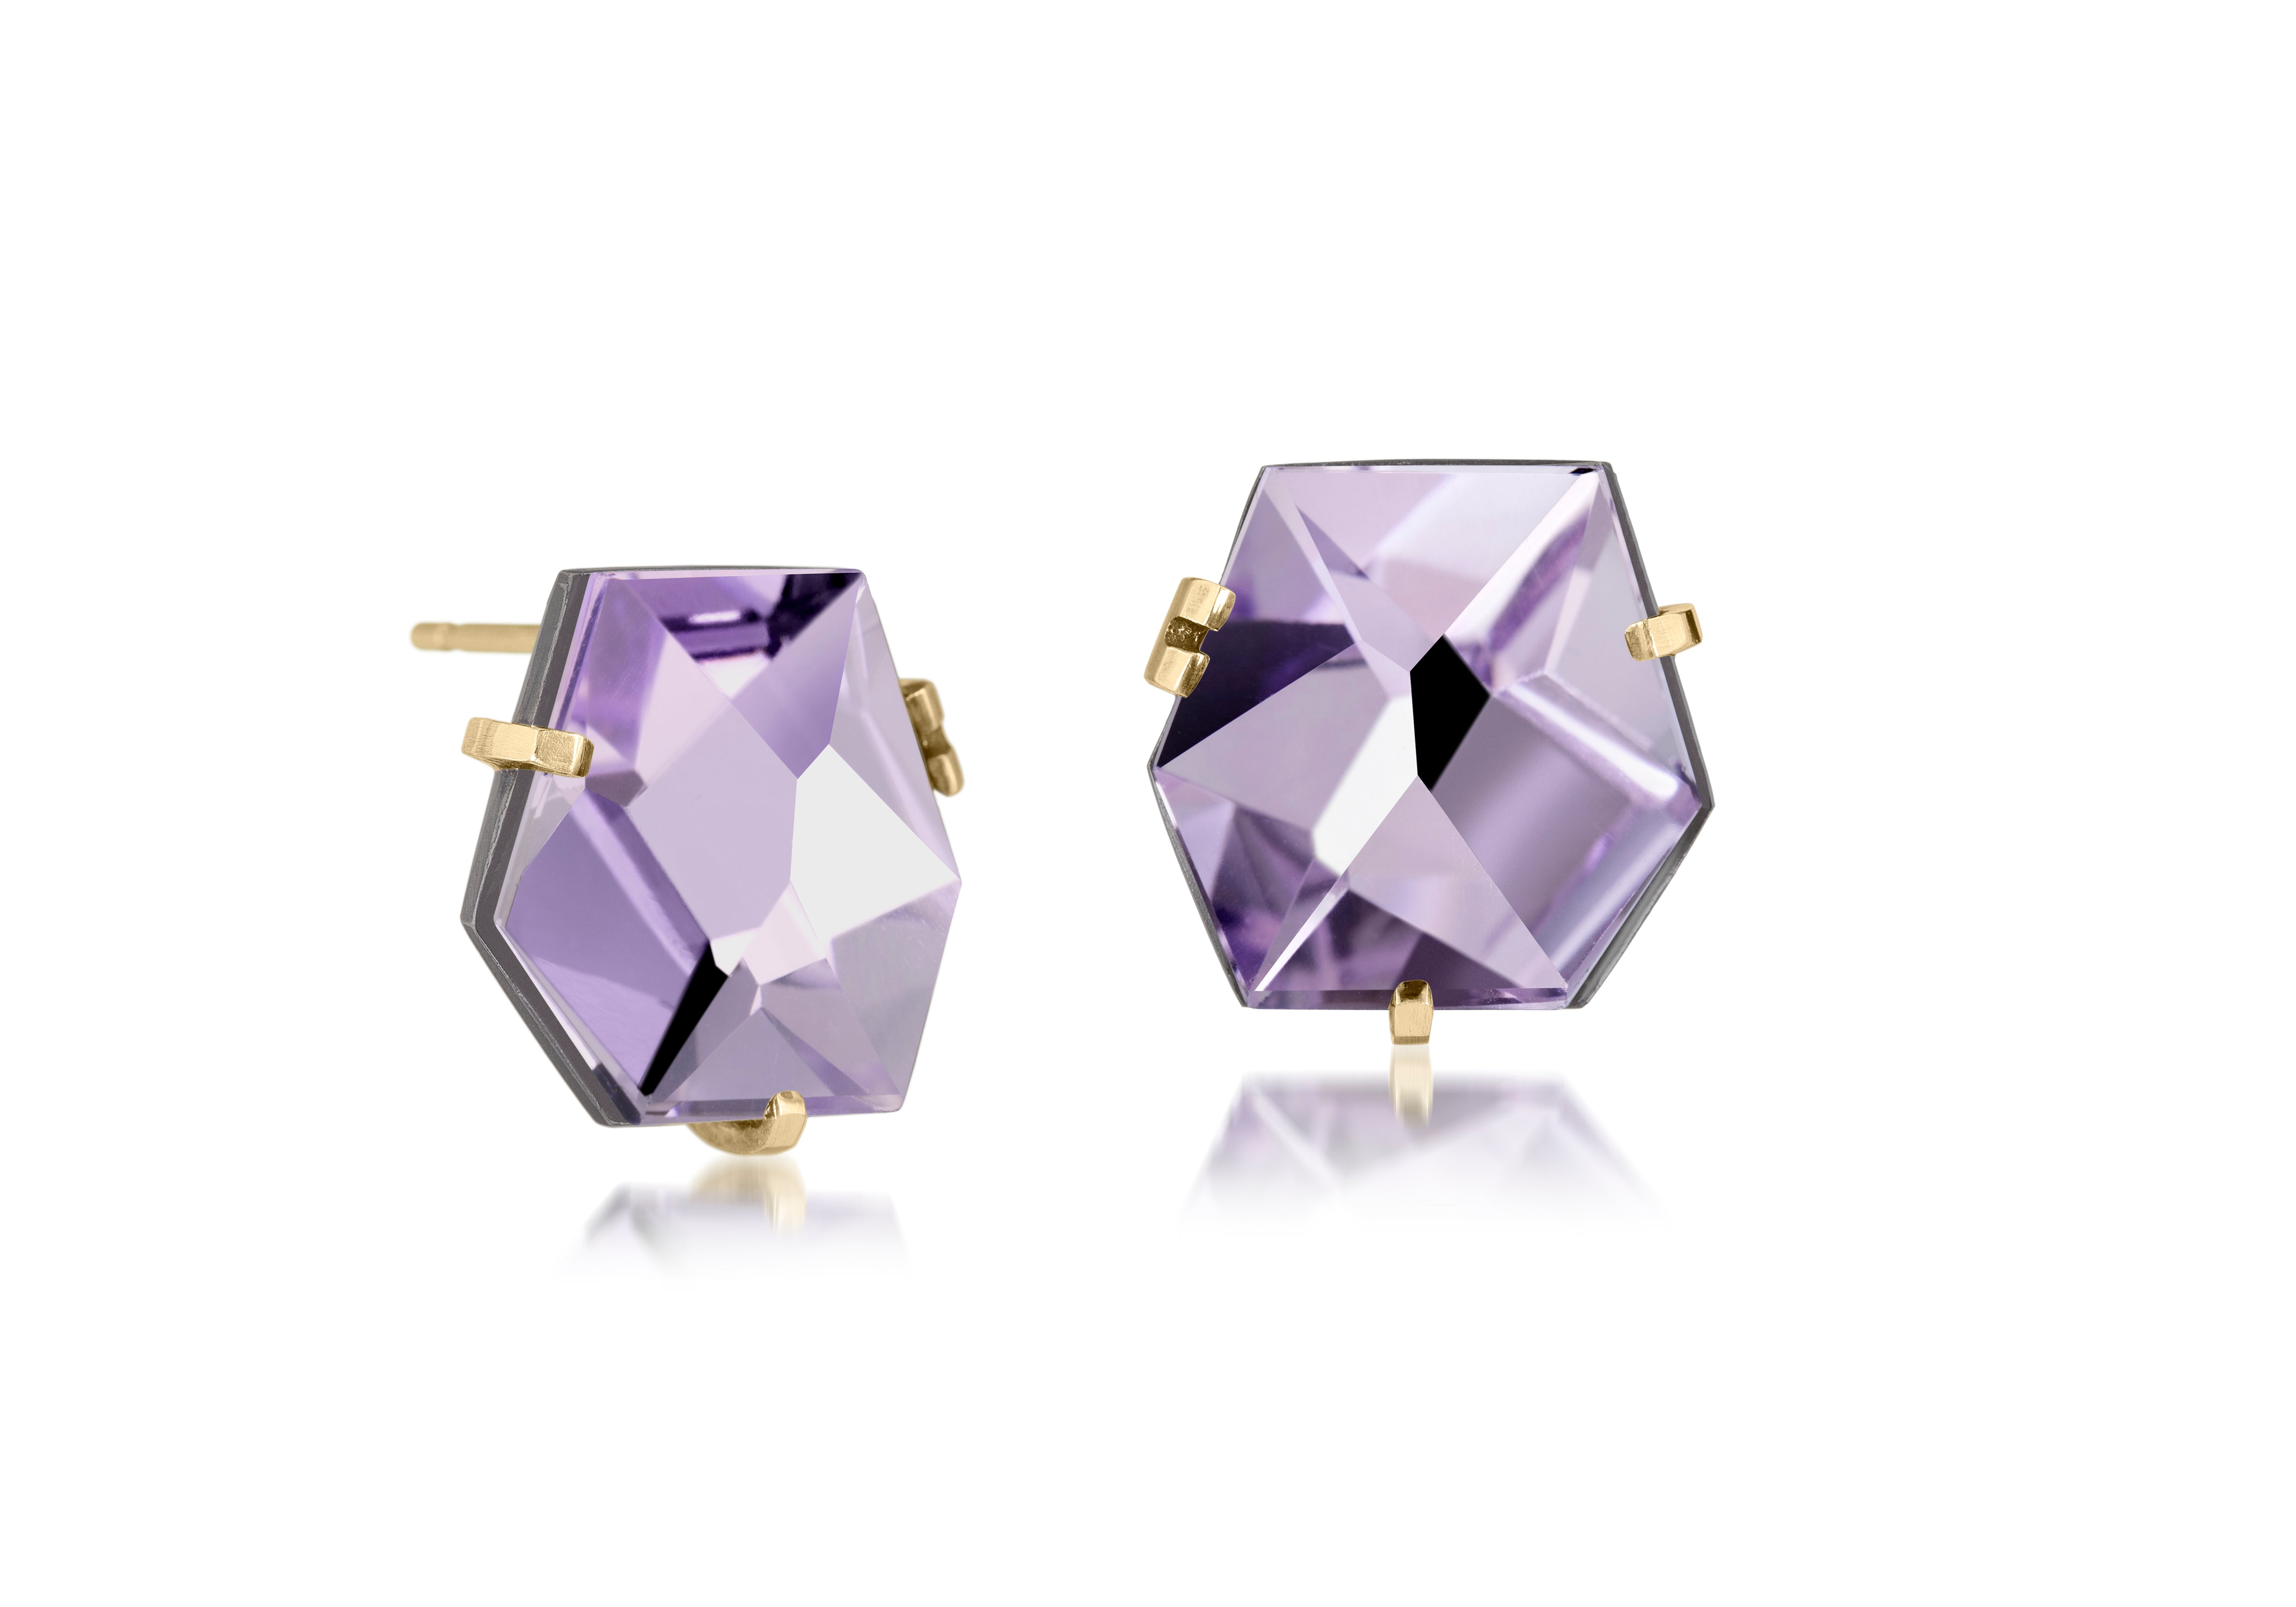 This smallest Facet earring of natural gemstone is set in oxidized sterling and 18k gold. Unique, hand cut faceted chunks of natural gem are prong set in 18k prongs with 14k posts and large backings. 17.0+ tcw.